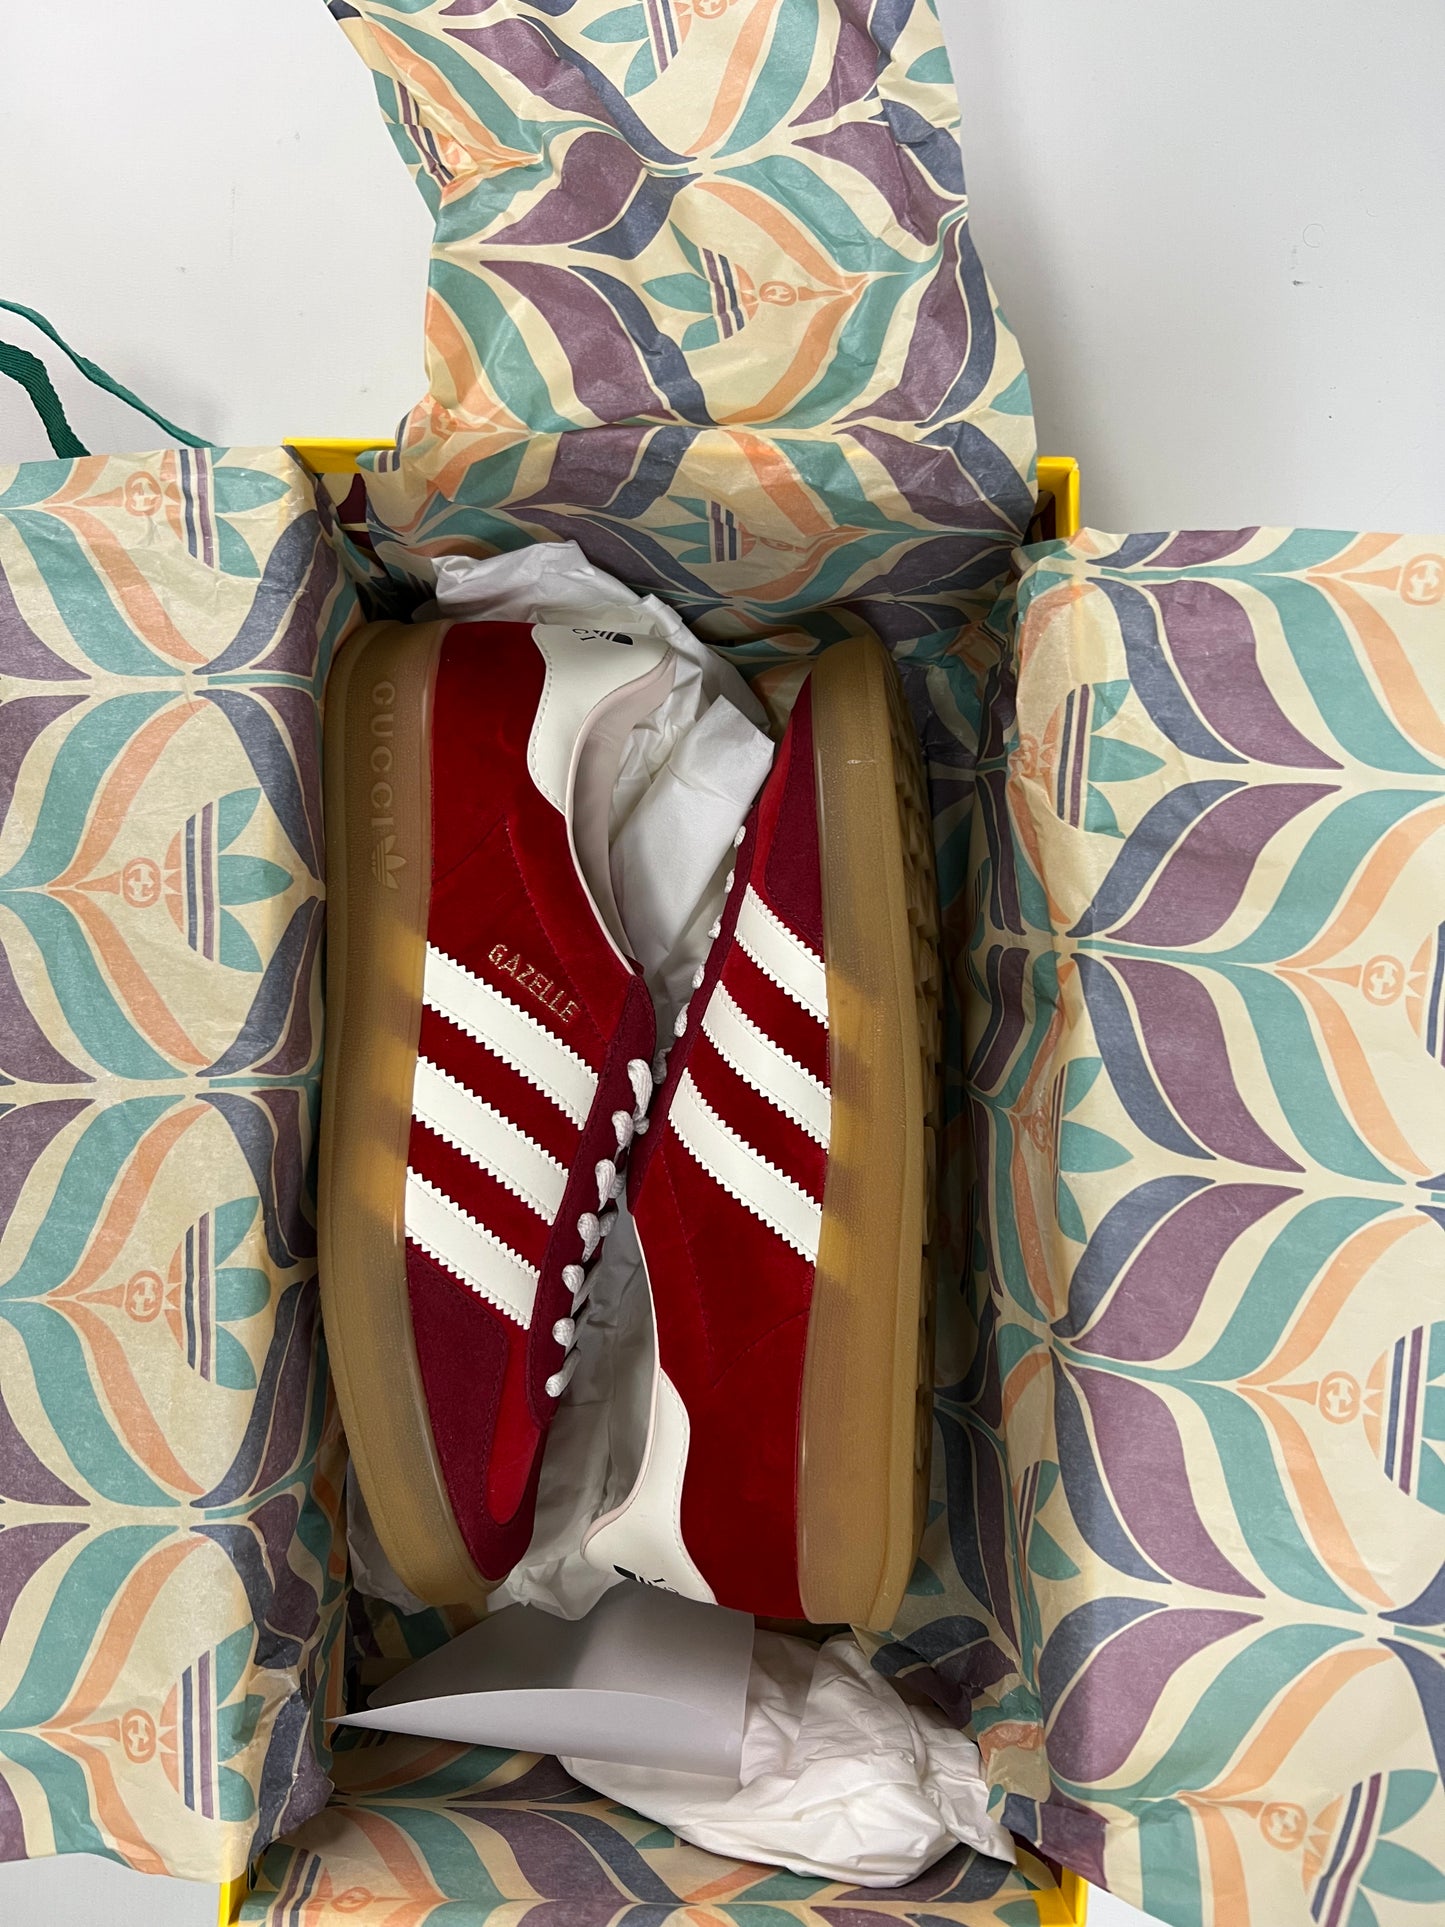 Gucci x Adidas Gazelle sneakers in velour red SZ:8|10|10.5